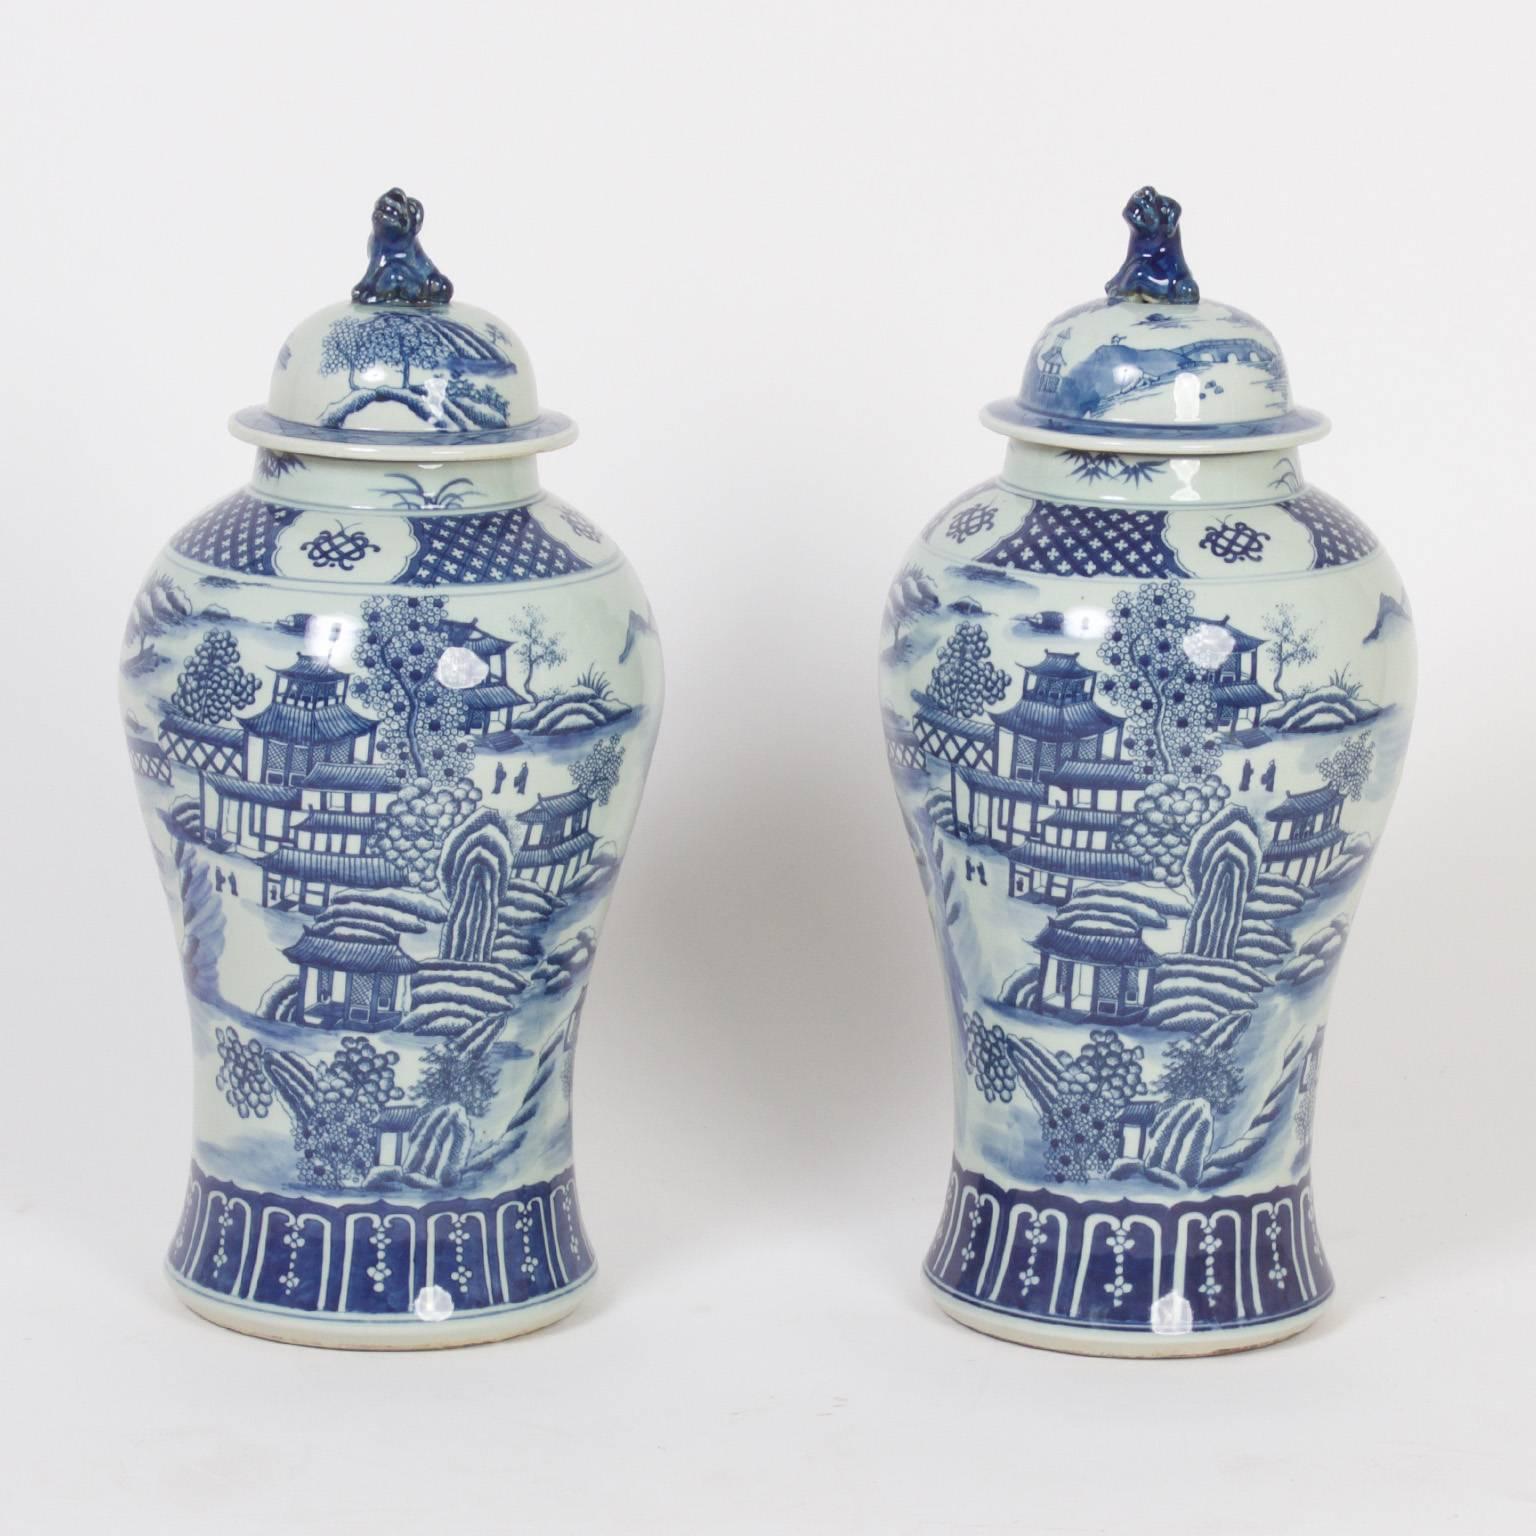 Traditional Chinese export style blue and white porcelain lidded jars decorated in blue and white with landscapes, architectural examples and bordered in geometric patterns.
 
 